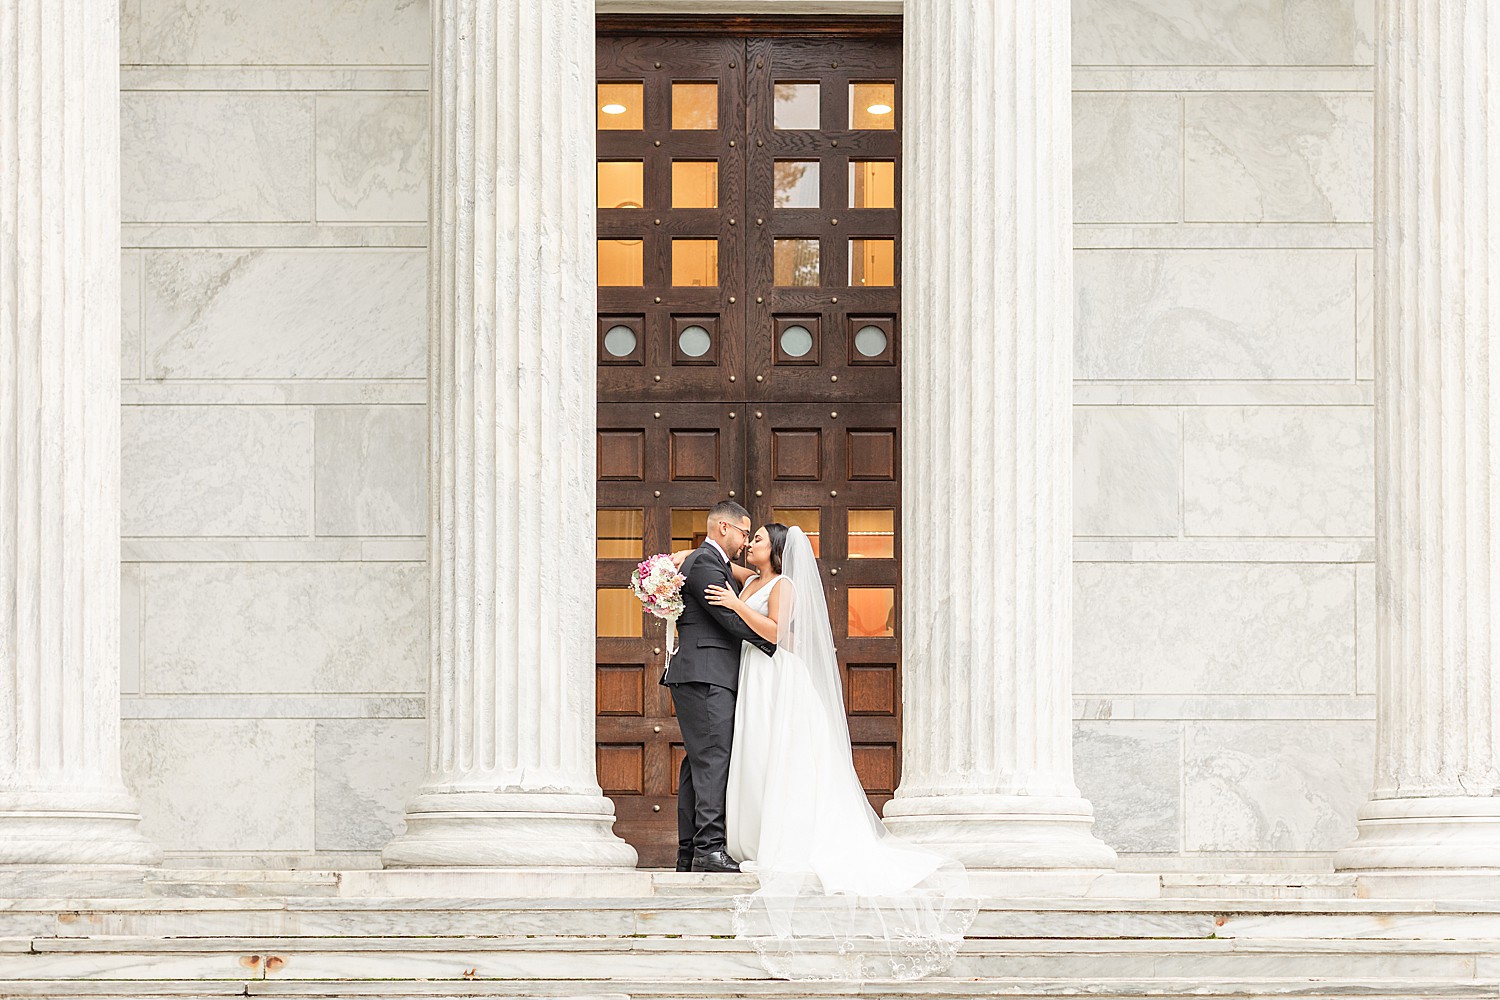 Husband + Wife take wedding portraits at Princeton University at the top of stairs by columns 